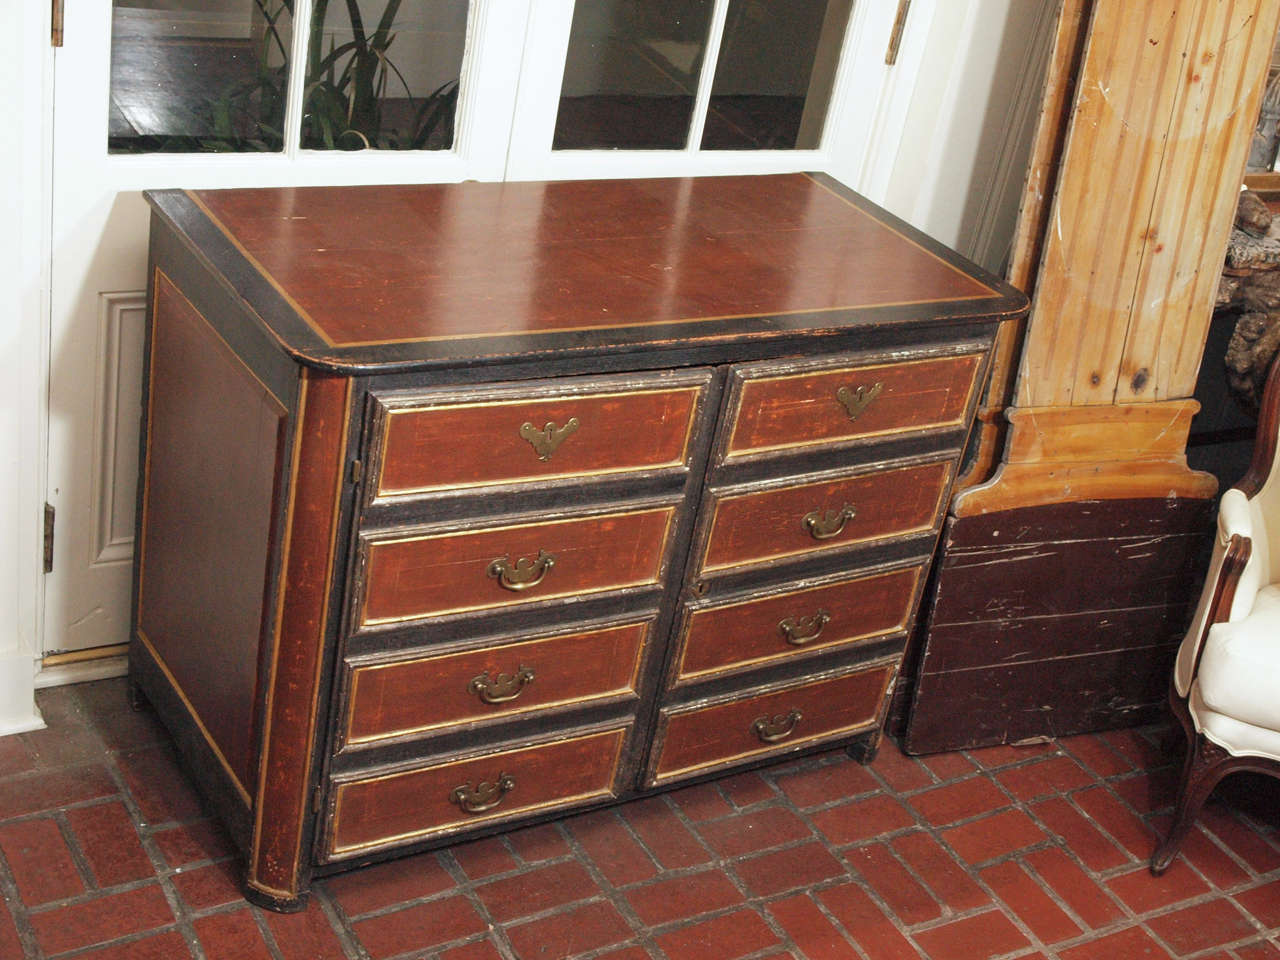 19th century two door painted and giltwood French Louis XVI map chest with two pull-out shelves